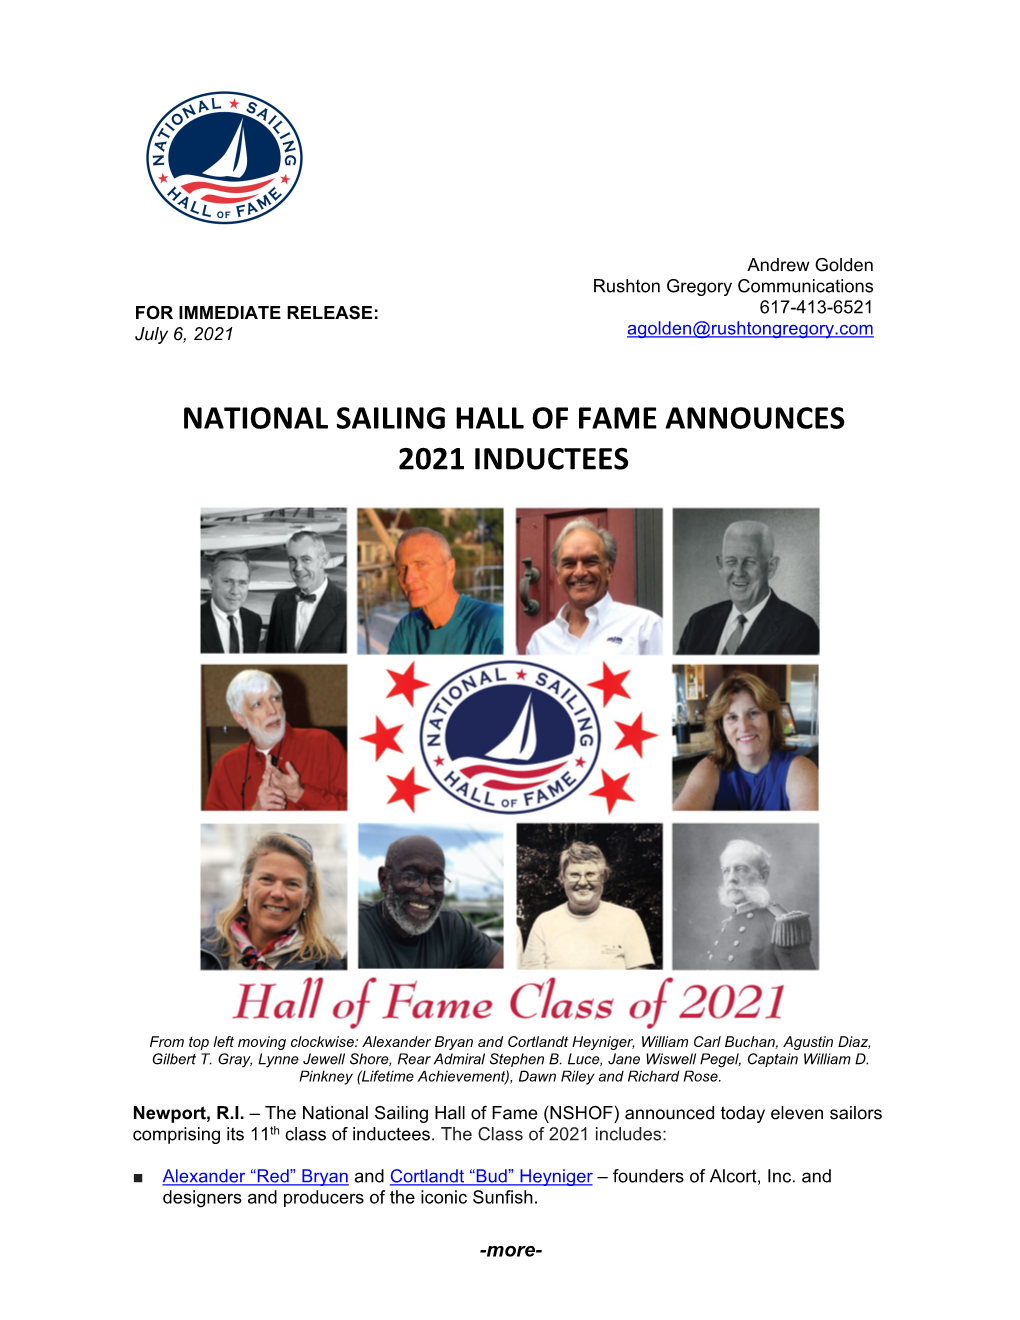 National Sailing Hall of Fame Announces 2021 Inductees